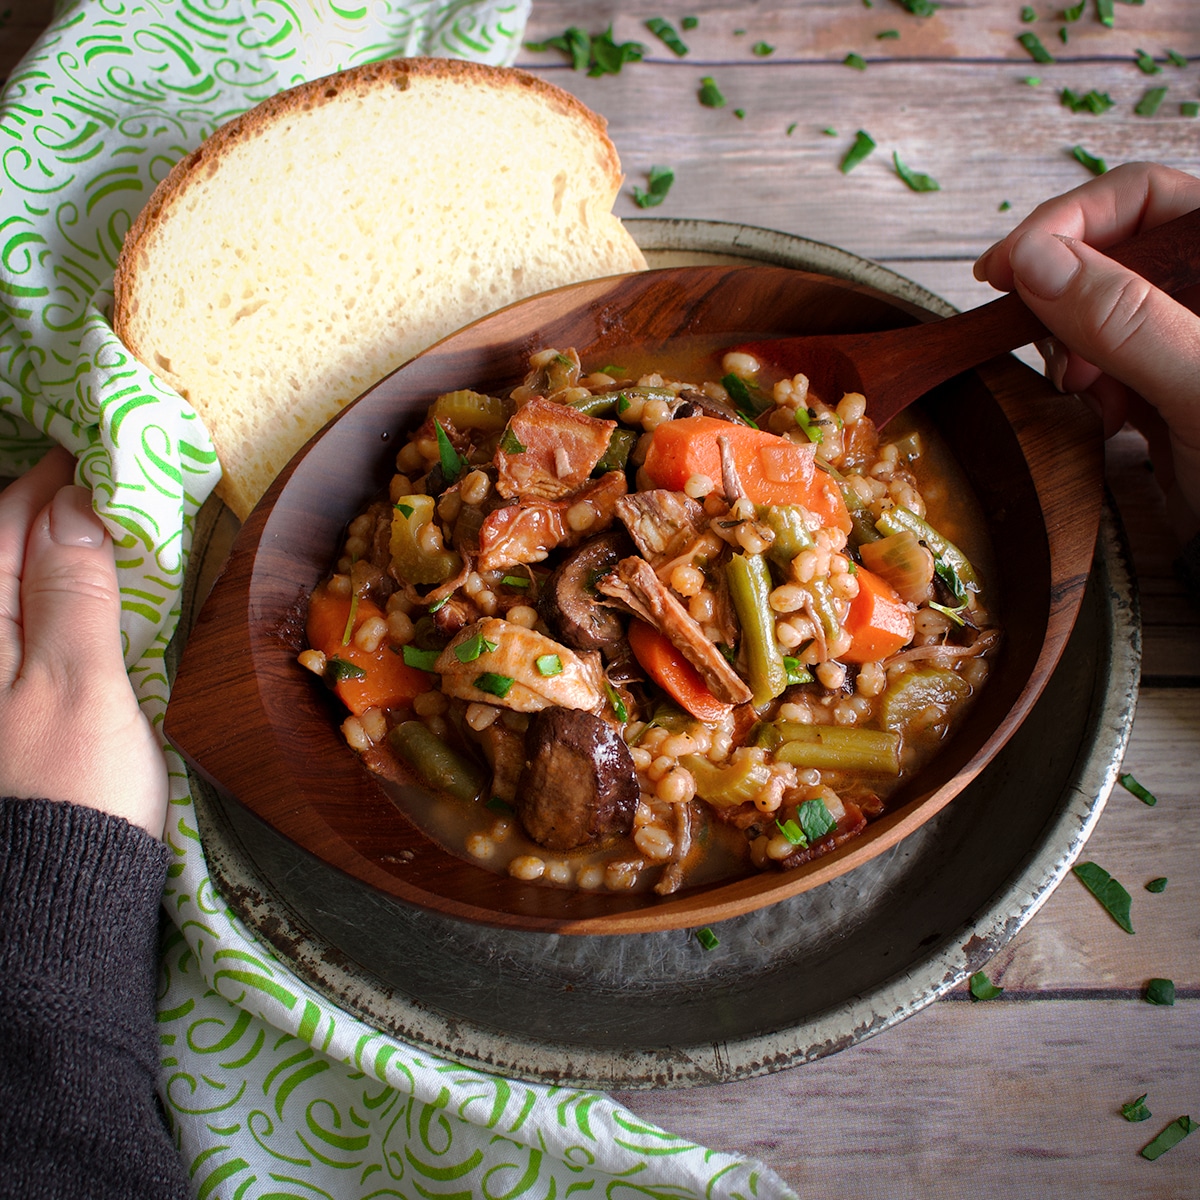 A wood bowl filled with homemade beef and barley soup.